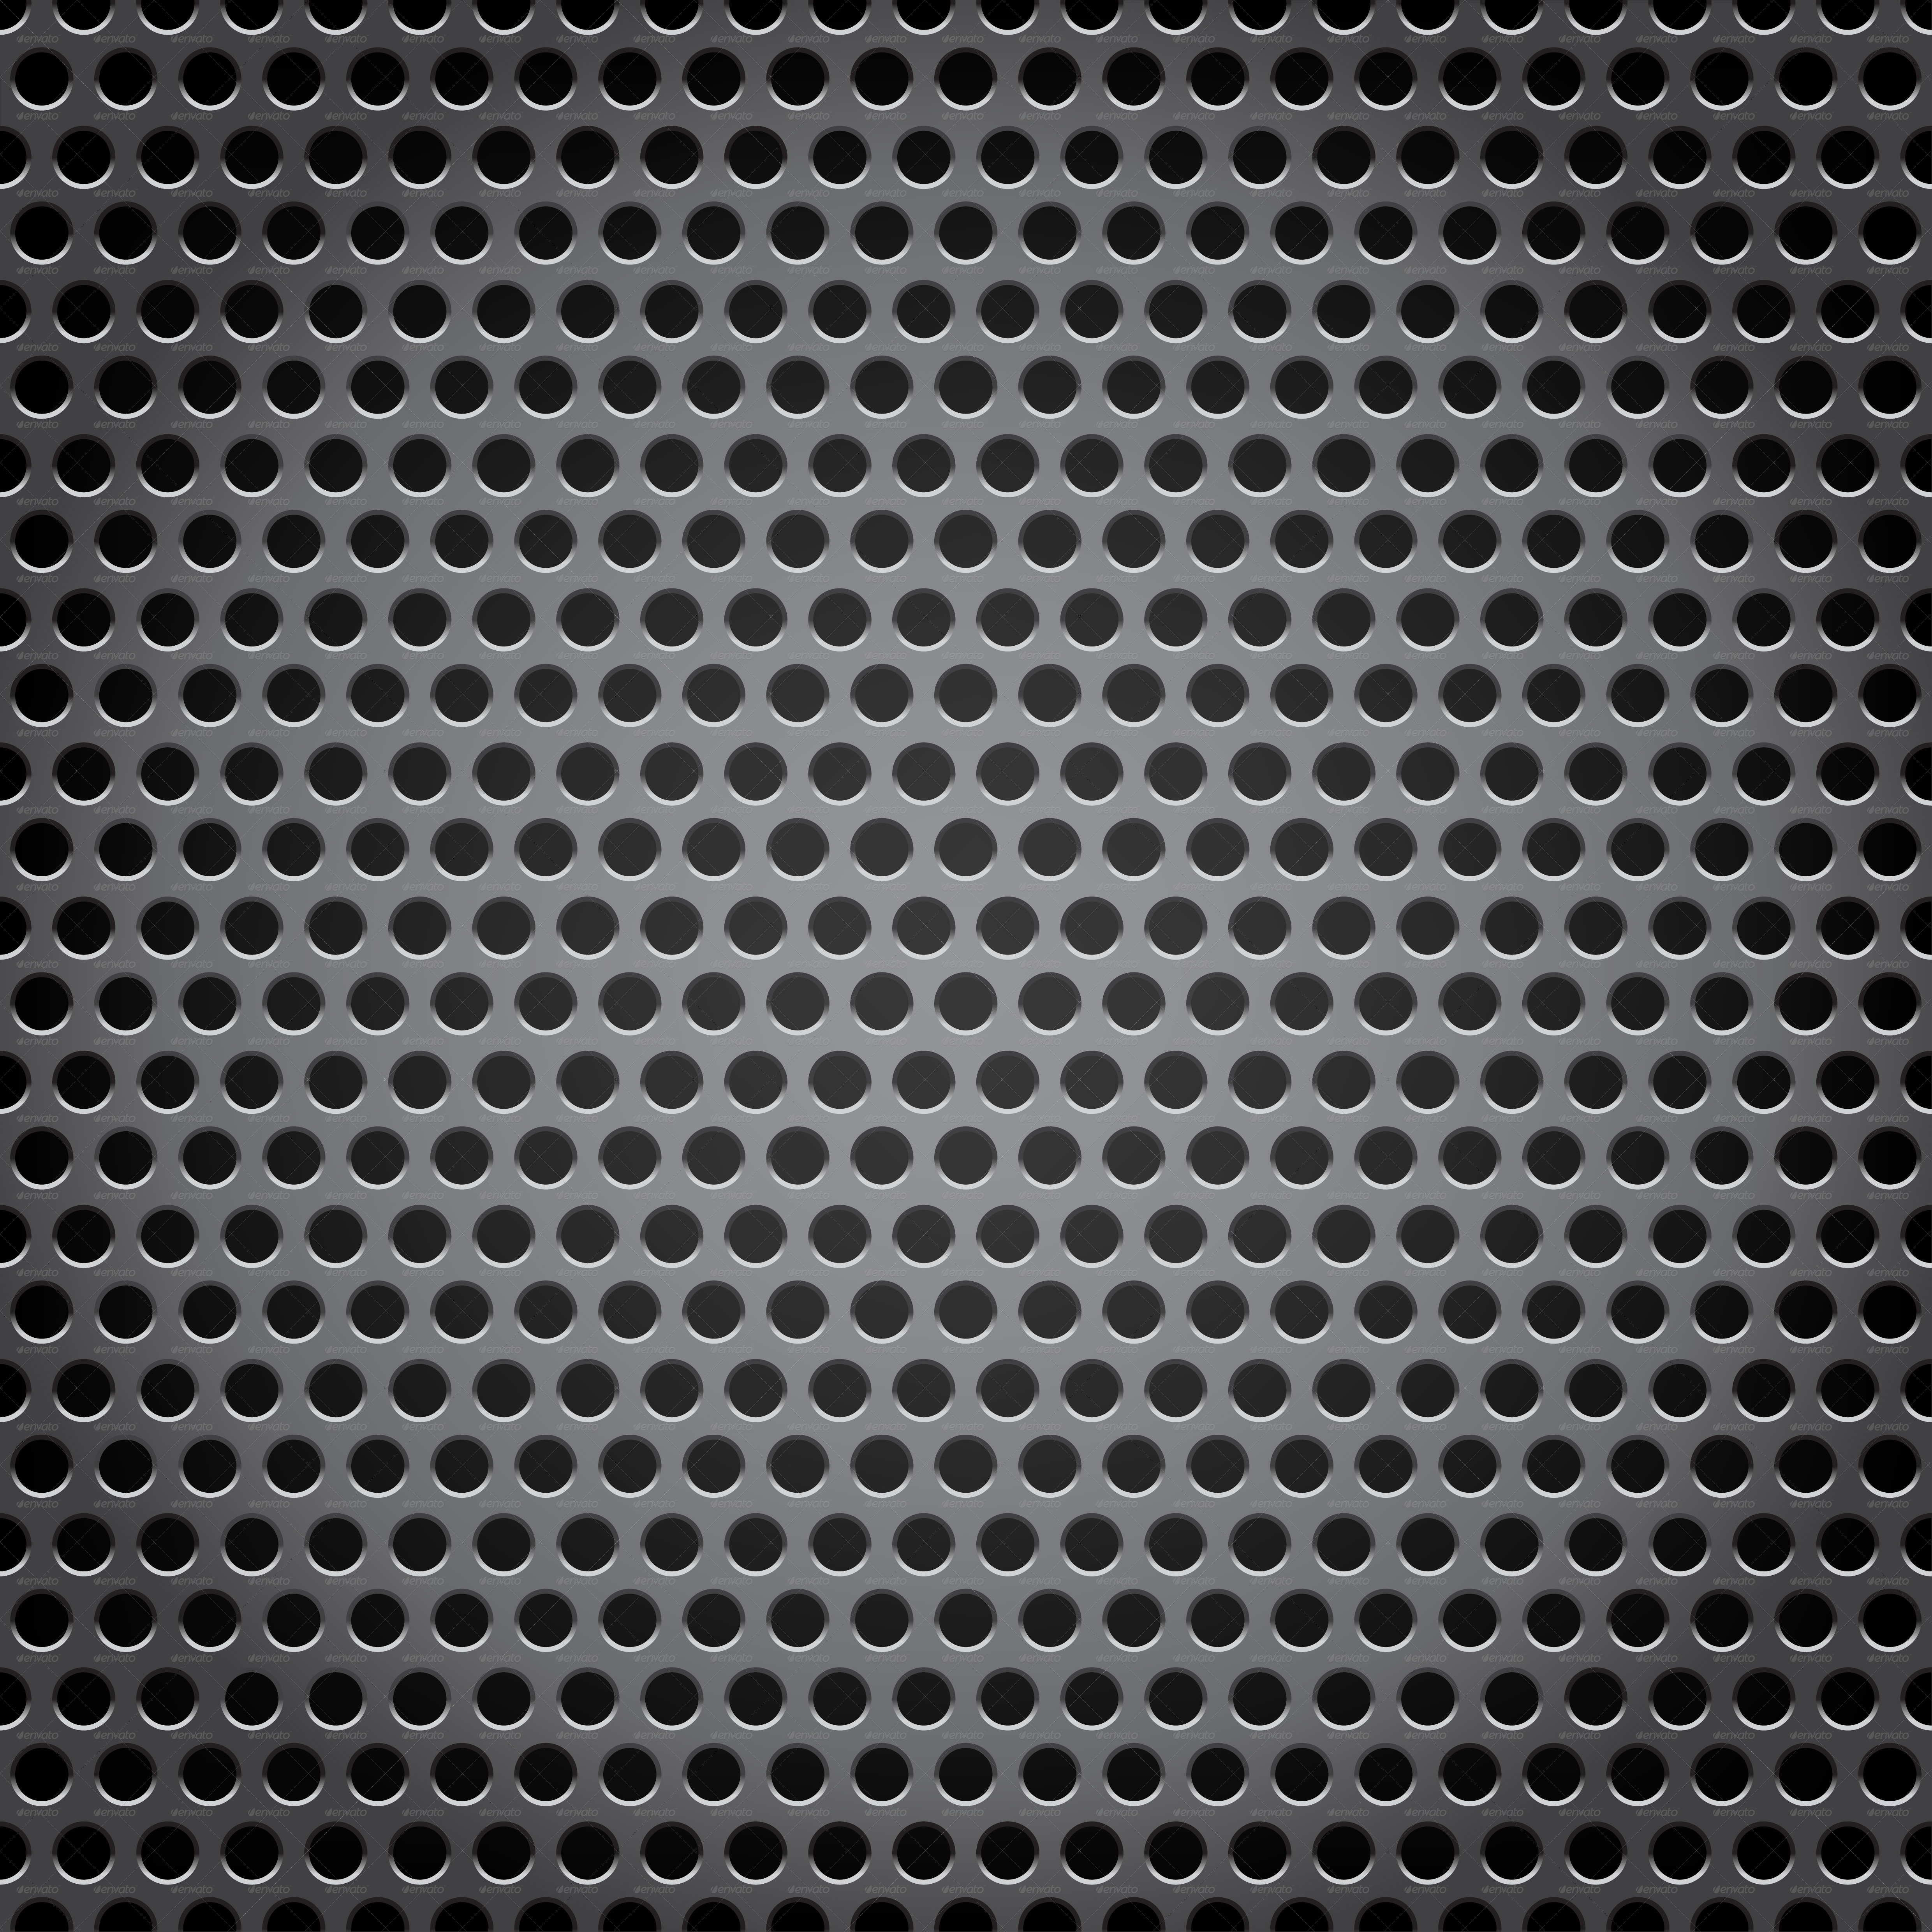 Metal Grid Background by romvo | GraphicRiver